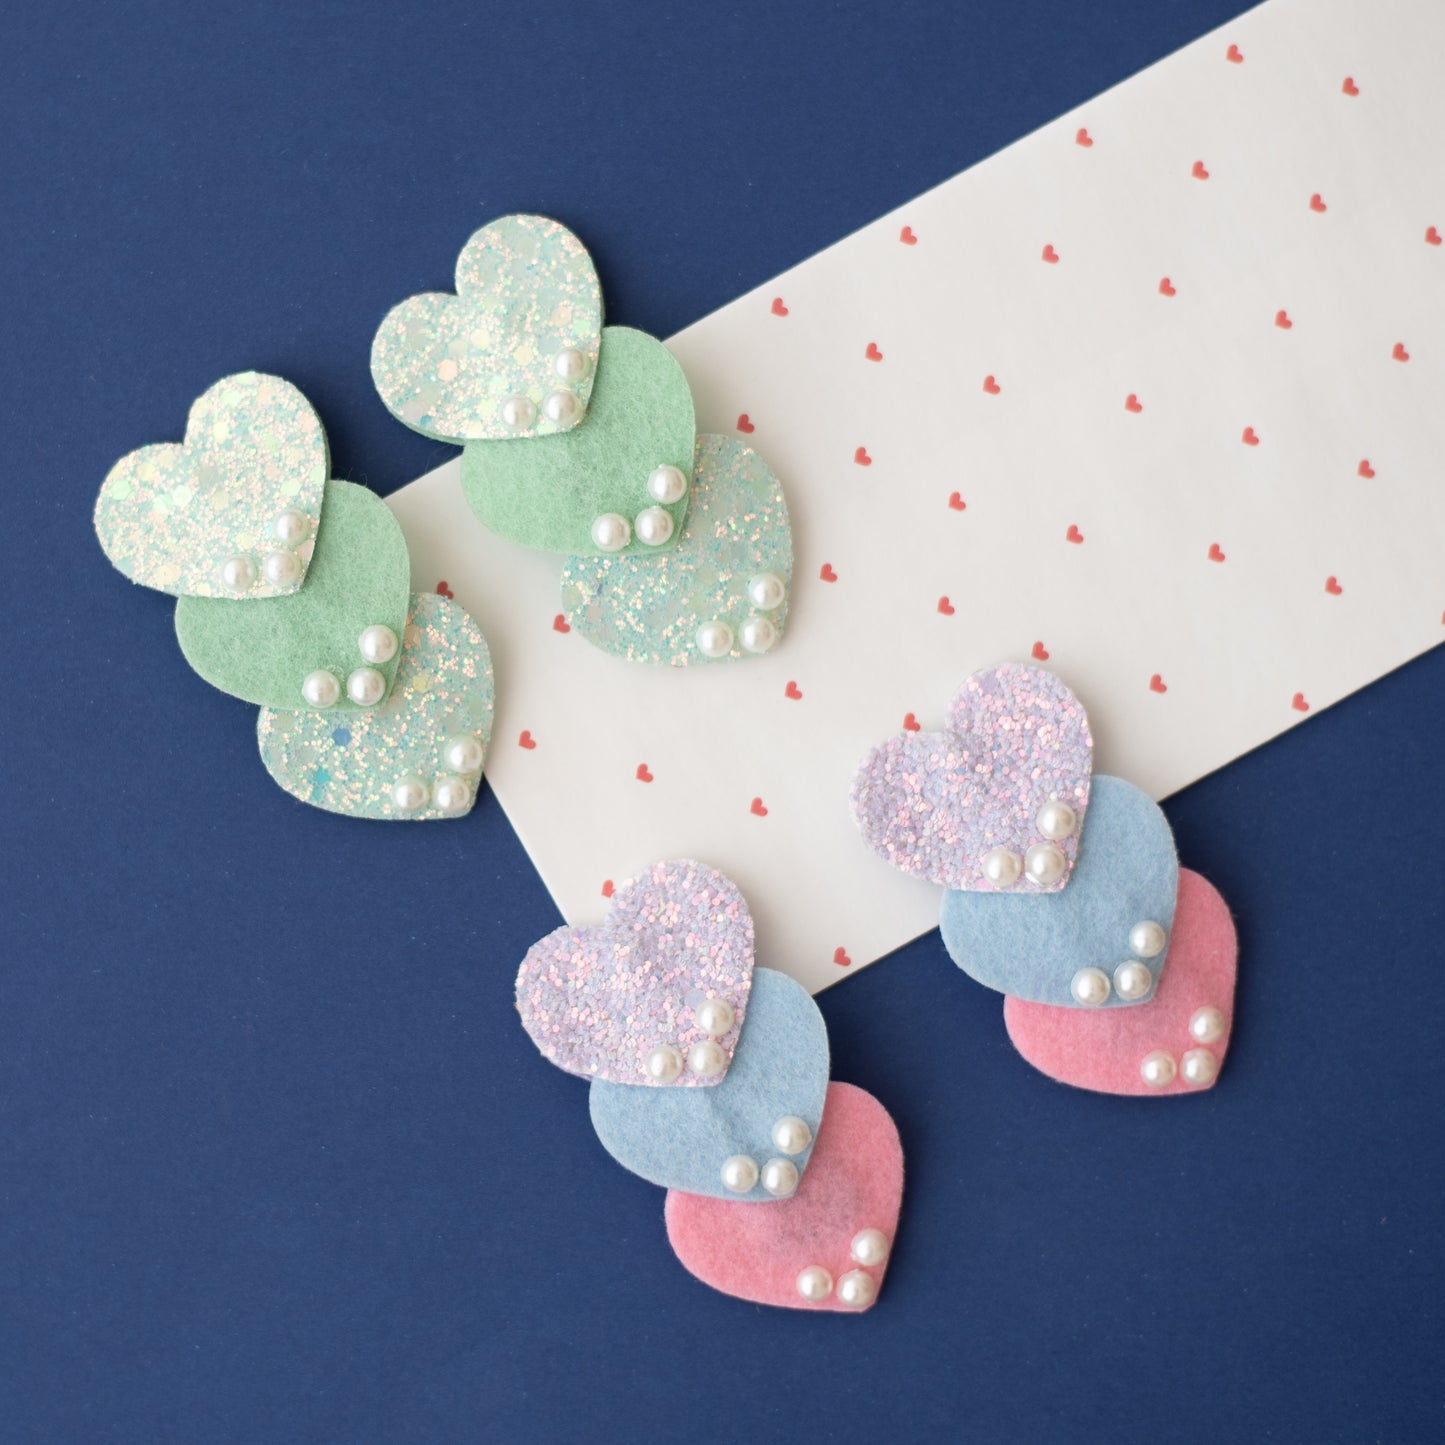 Cute shimmer heart tic-tac pins embellished with pearls  - Sea green, Pink, Light blue